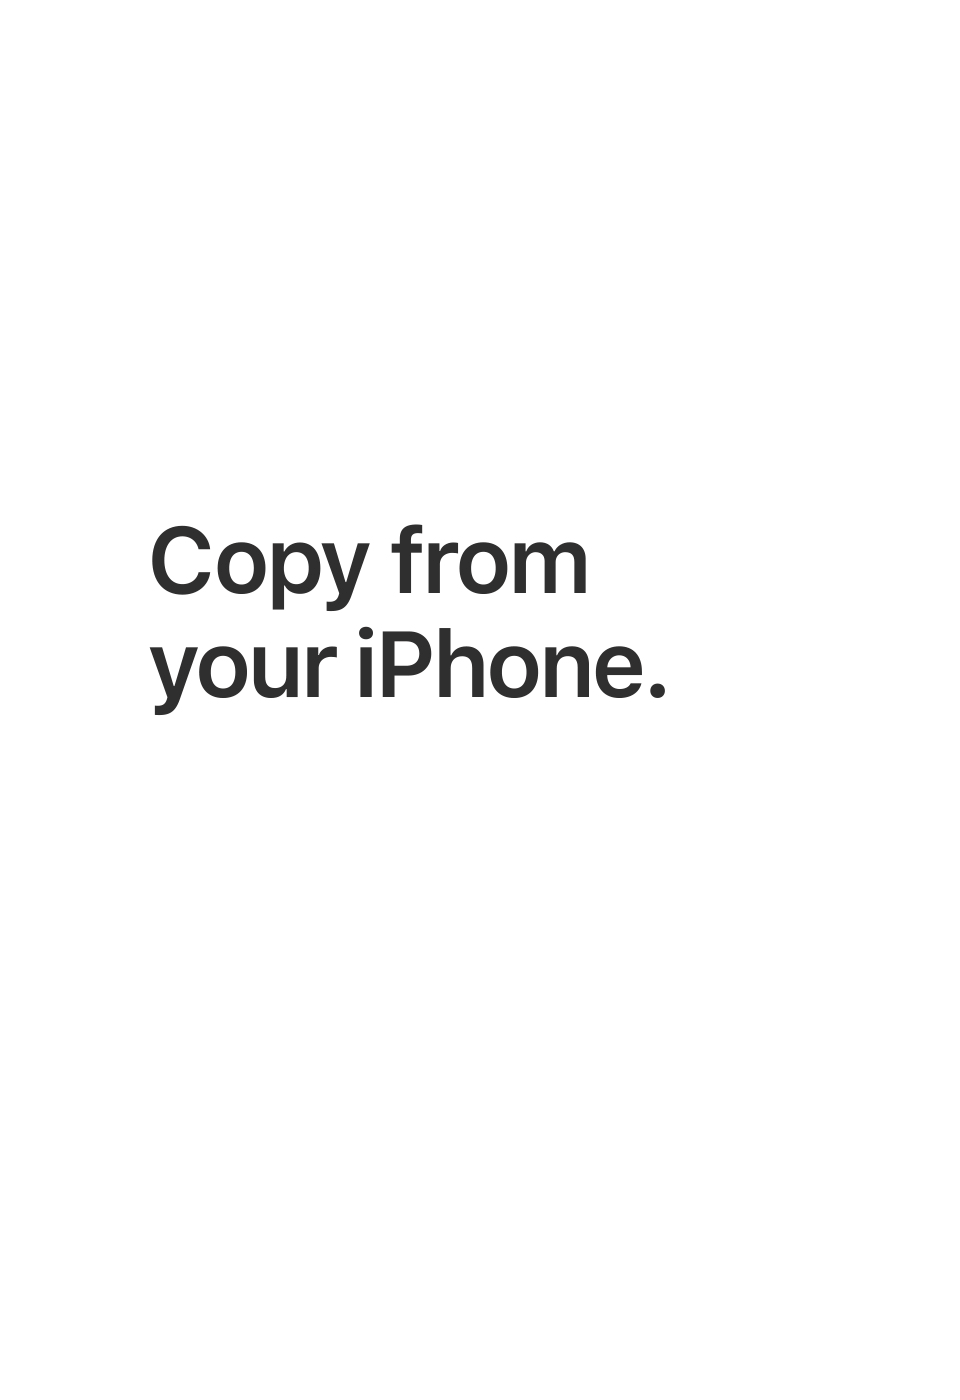 Copy from your iPhone. Paste to your Mac with just a tap.